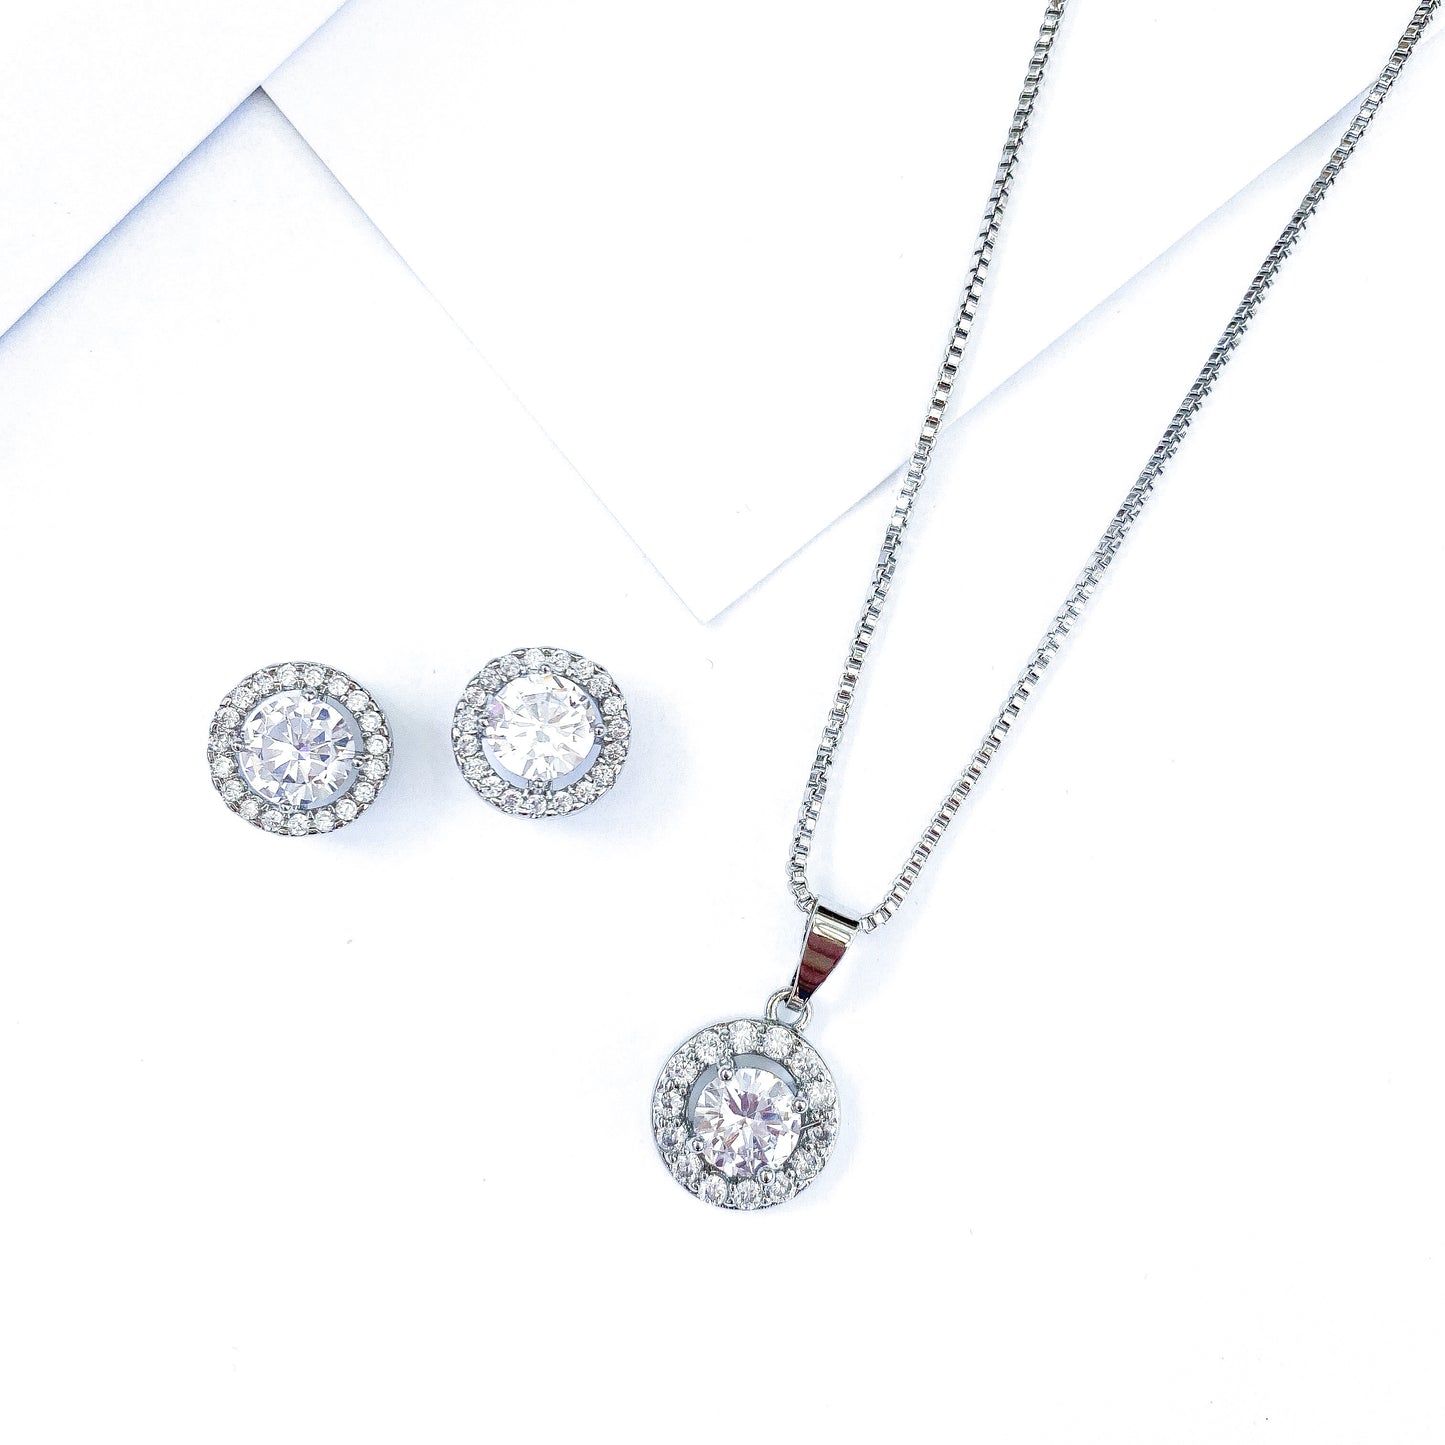 Harmony Earrings and Necklace Set - Silver